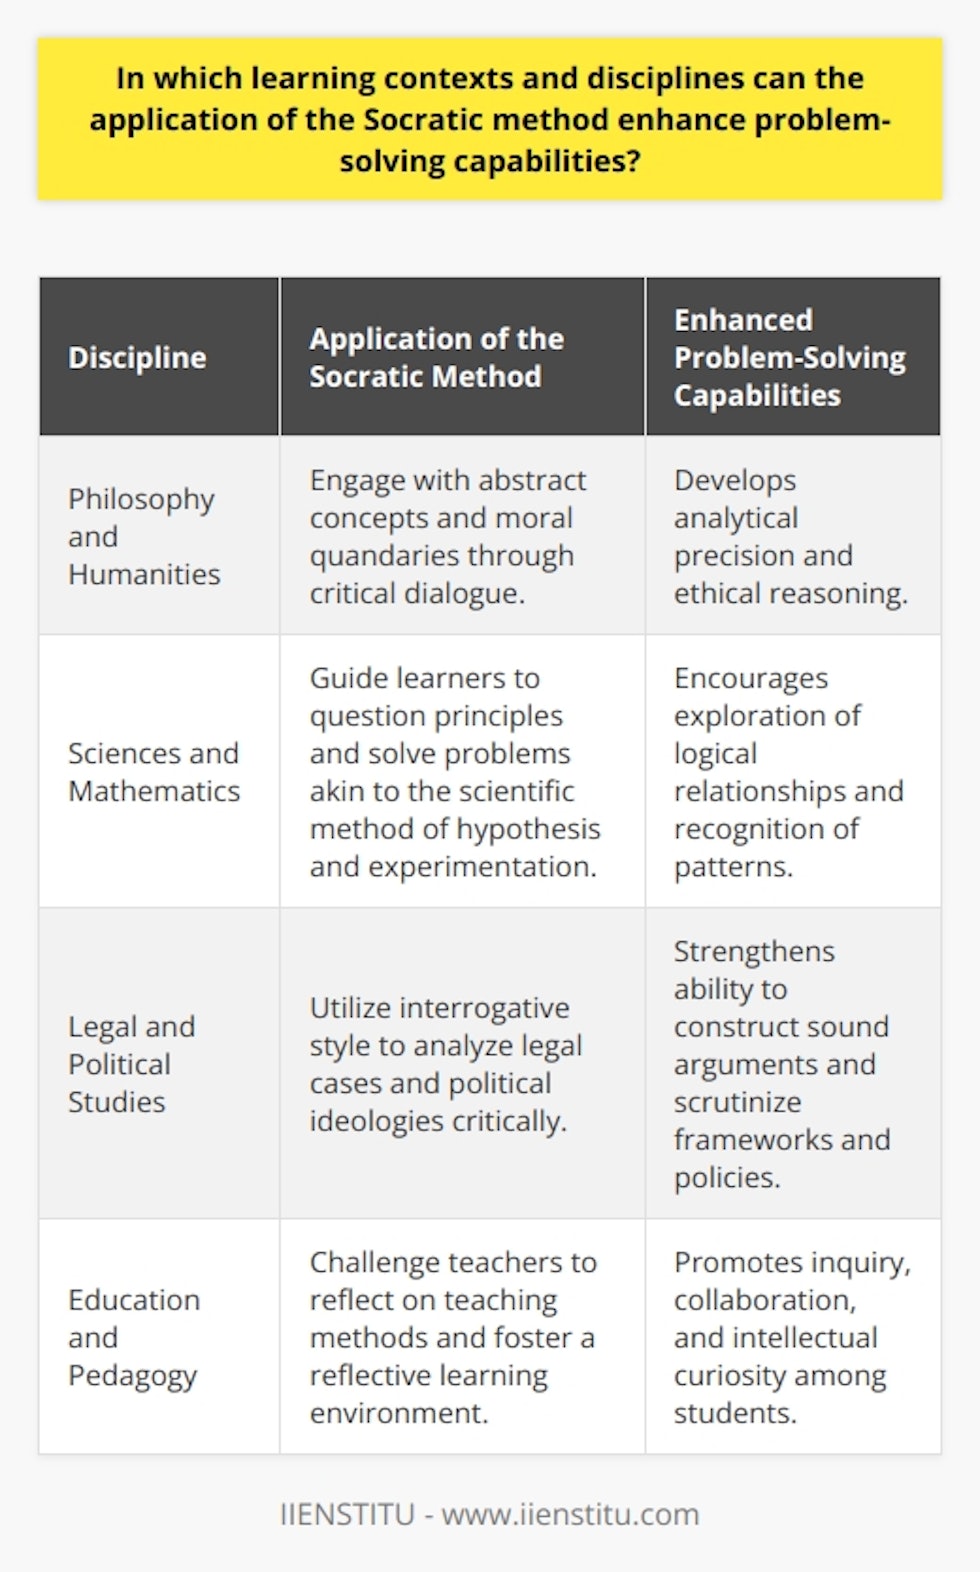 The Socratic method, rooted in critical dialogue and inquiry, has the potential to significantly enhance problem-solving capabilities across diverse learning contexts and disciplines. Philosophy and the Humanities: As a fundamental pillar of philosophical education, the Socratic method prompts students to deeply engage with abstract concepts and moral quandaries, fostering analytical precision and ethical reasoning. This approach is easily adapted to broader humanities subjects such as cultural studies and history, where it encourages learners to dissect complex narratives and unearth underlying themes and biases, thereby sharpening their interpretative acumen.Sciences and Mathematics: Contrary to popular belief, the Socratic method's utility extends into the empirical domains of science and math. By inviting learners to continually question core principles and solve problems through a guided discovery process, the method aligns seamlessly with the scientific method's emphasis on hypothesis and experimentation. Within mathematics, the Socratic technique allows students to explore proofs and solutions through a systematic questioning process aimed at illuminating logical relationships and inherent patterns.Legal and Political Studies: Legal education particularly benefits from the method's interrogative style. Law students are trained to dissect complex judgments and construct sound arguments—a core skill enriched by the Socratic emphasis on critical thinking and reasoned debate. Political science courses use the Socratic method to examine governance frameworks and policy issues, equipping students to scrutinize political ideologies and construct well-founded arguments.Education and Pedagogy: The transformative power of the Socratic method also shines in the development of teaching strategies. By challenging prospective educators to reflect on their pedagogical beliefs and methods, it hones their ability to facilitate dynamic and reflective learning environments. Practicing this method in the classroom promotes a culture of inquiry, collaboration, and intellectual curiosity, vital for the development of lifelong learners.Through the Socratic method, educators across various disciplines can galvanize an investigative spirit, instilling in students the competencies needed to approach problems with discernment and creativity. This approach not only enhances academic performance but prepares individuals to tackle real-world challenges with a structured, inquisitive mindset.